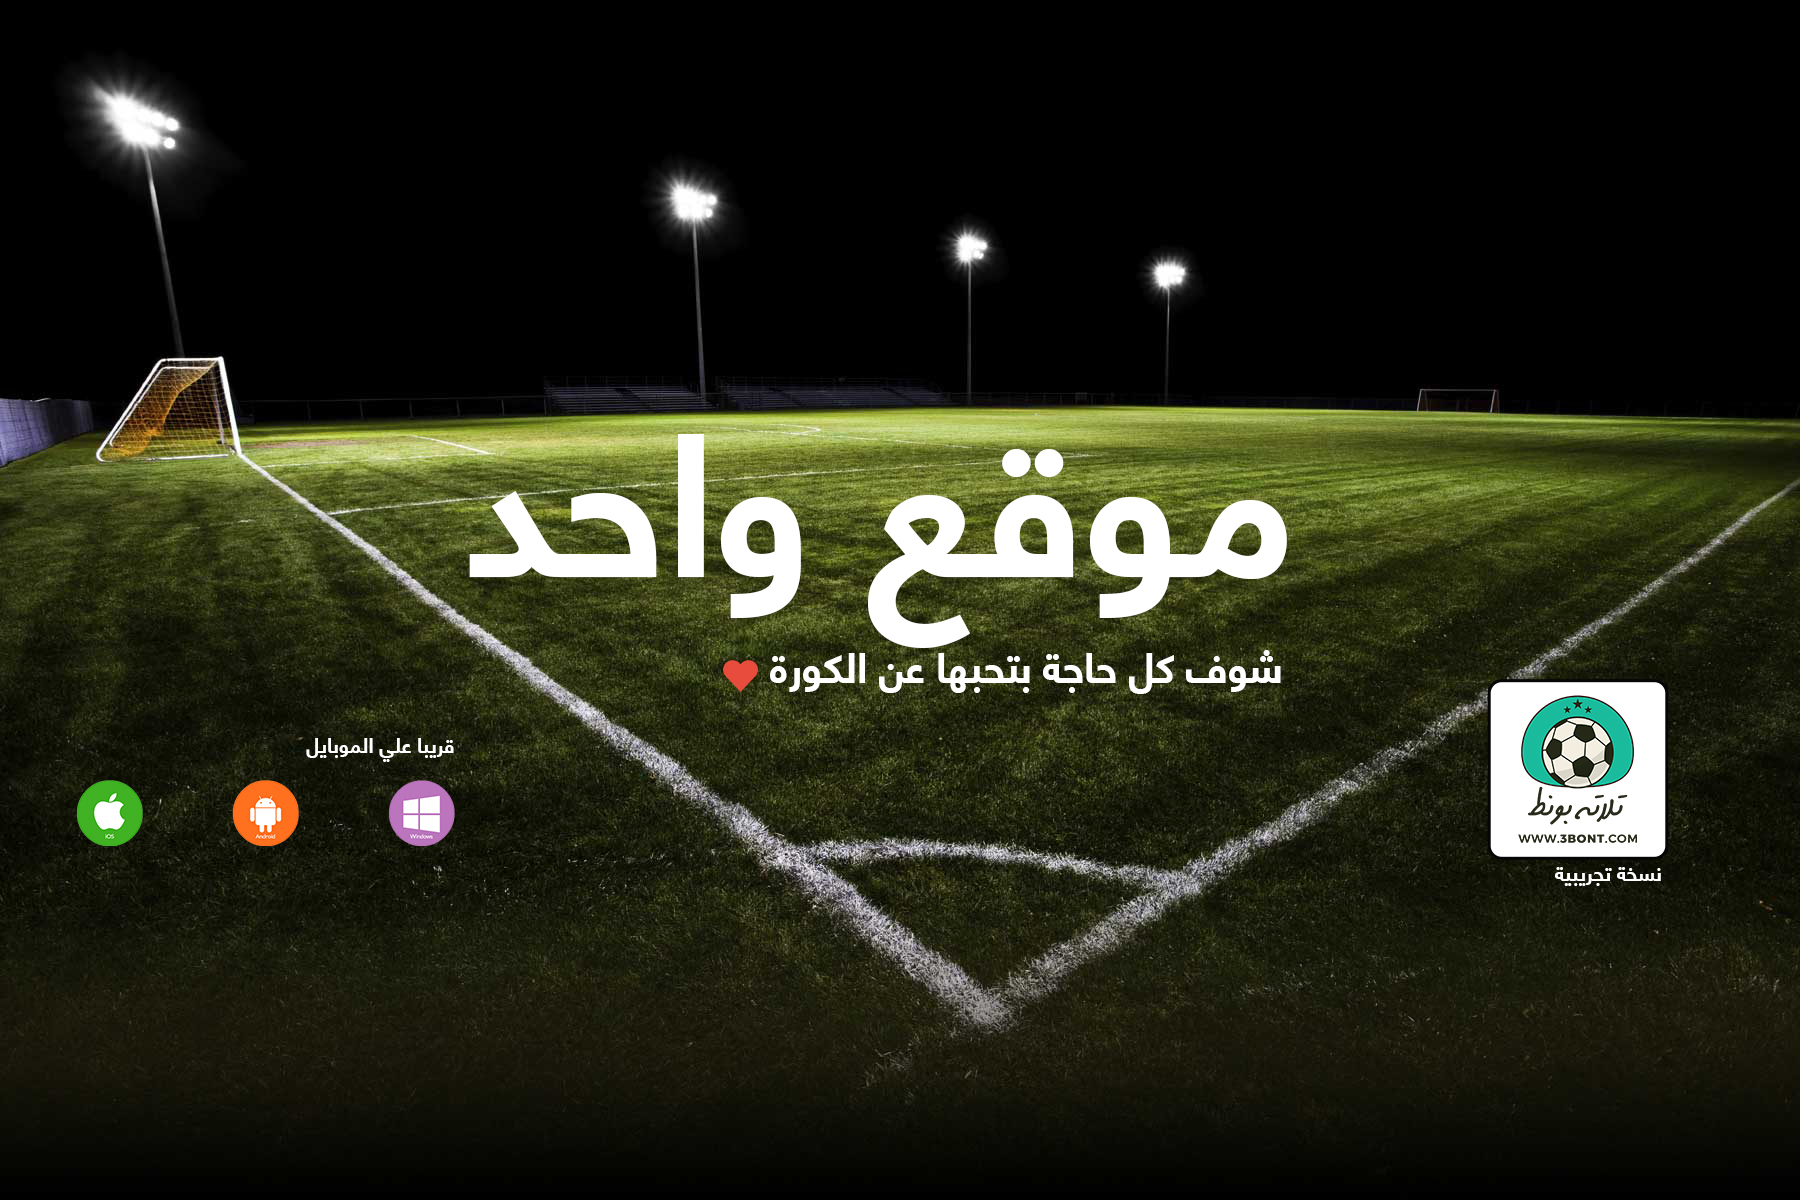 3Bont: The First Middle Eastern Platform for Football Content